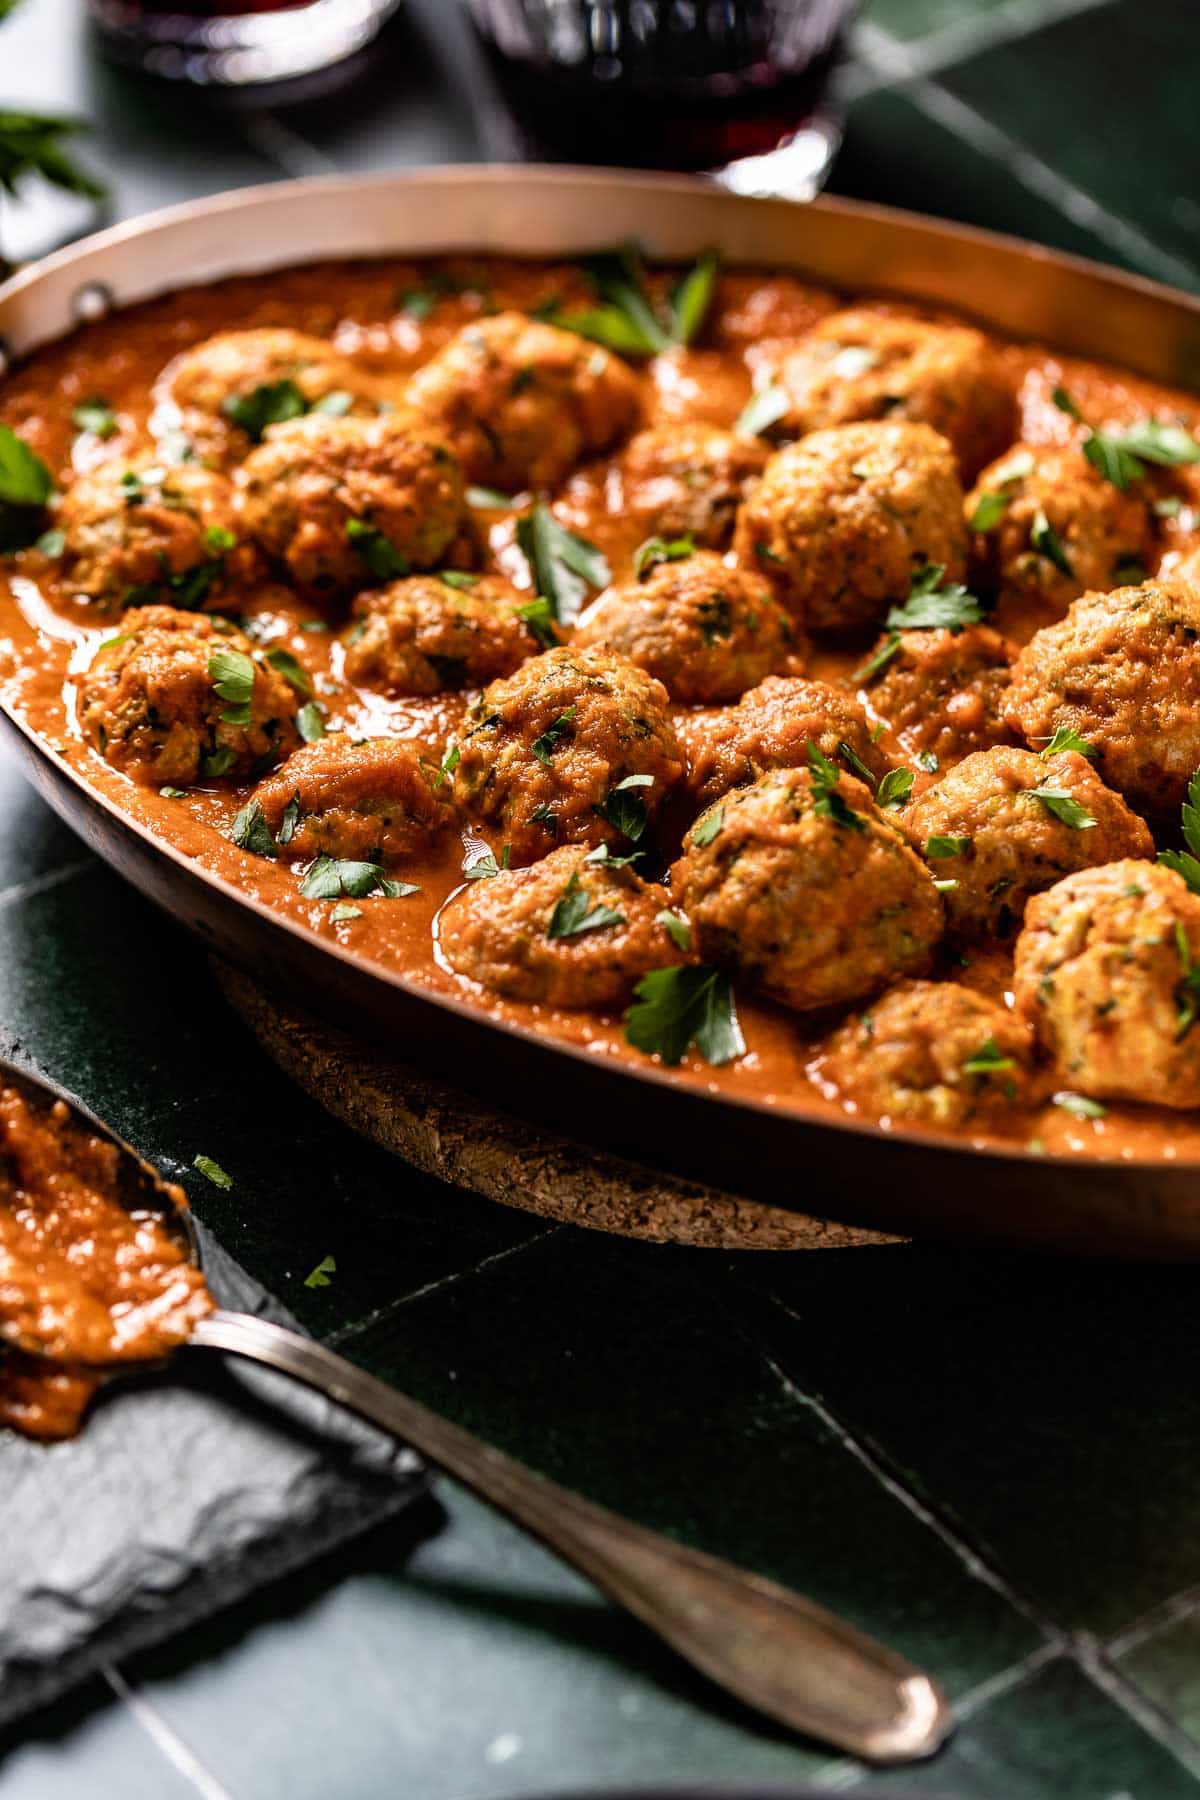 Meatballs made from ground turkey in a pan of sauce shown from the side view.